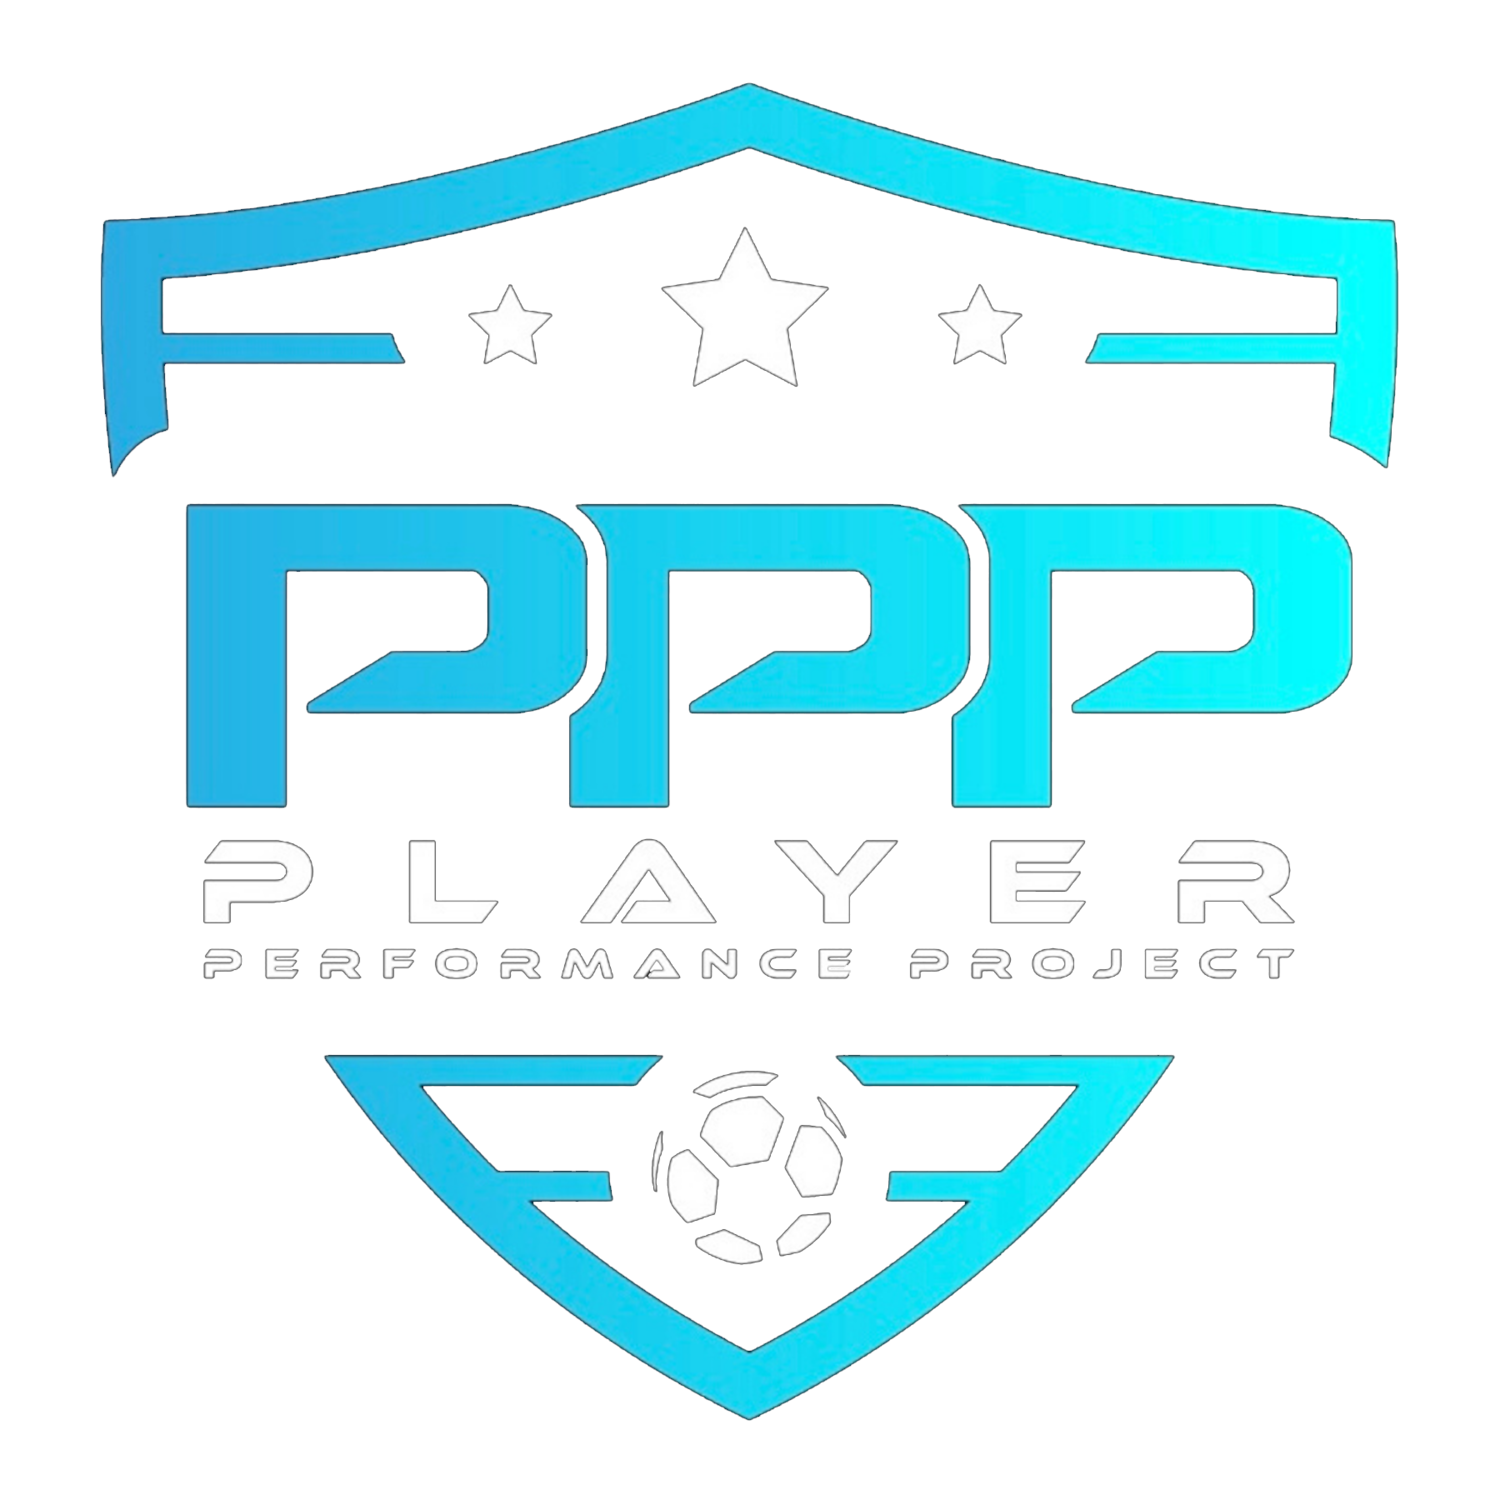 Player Performance Project